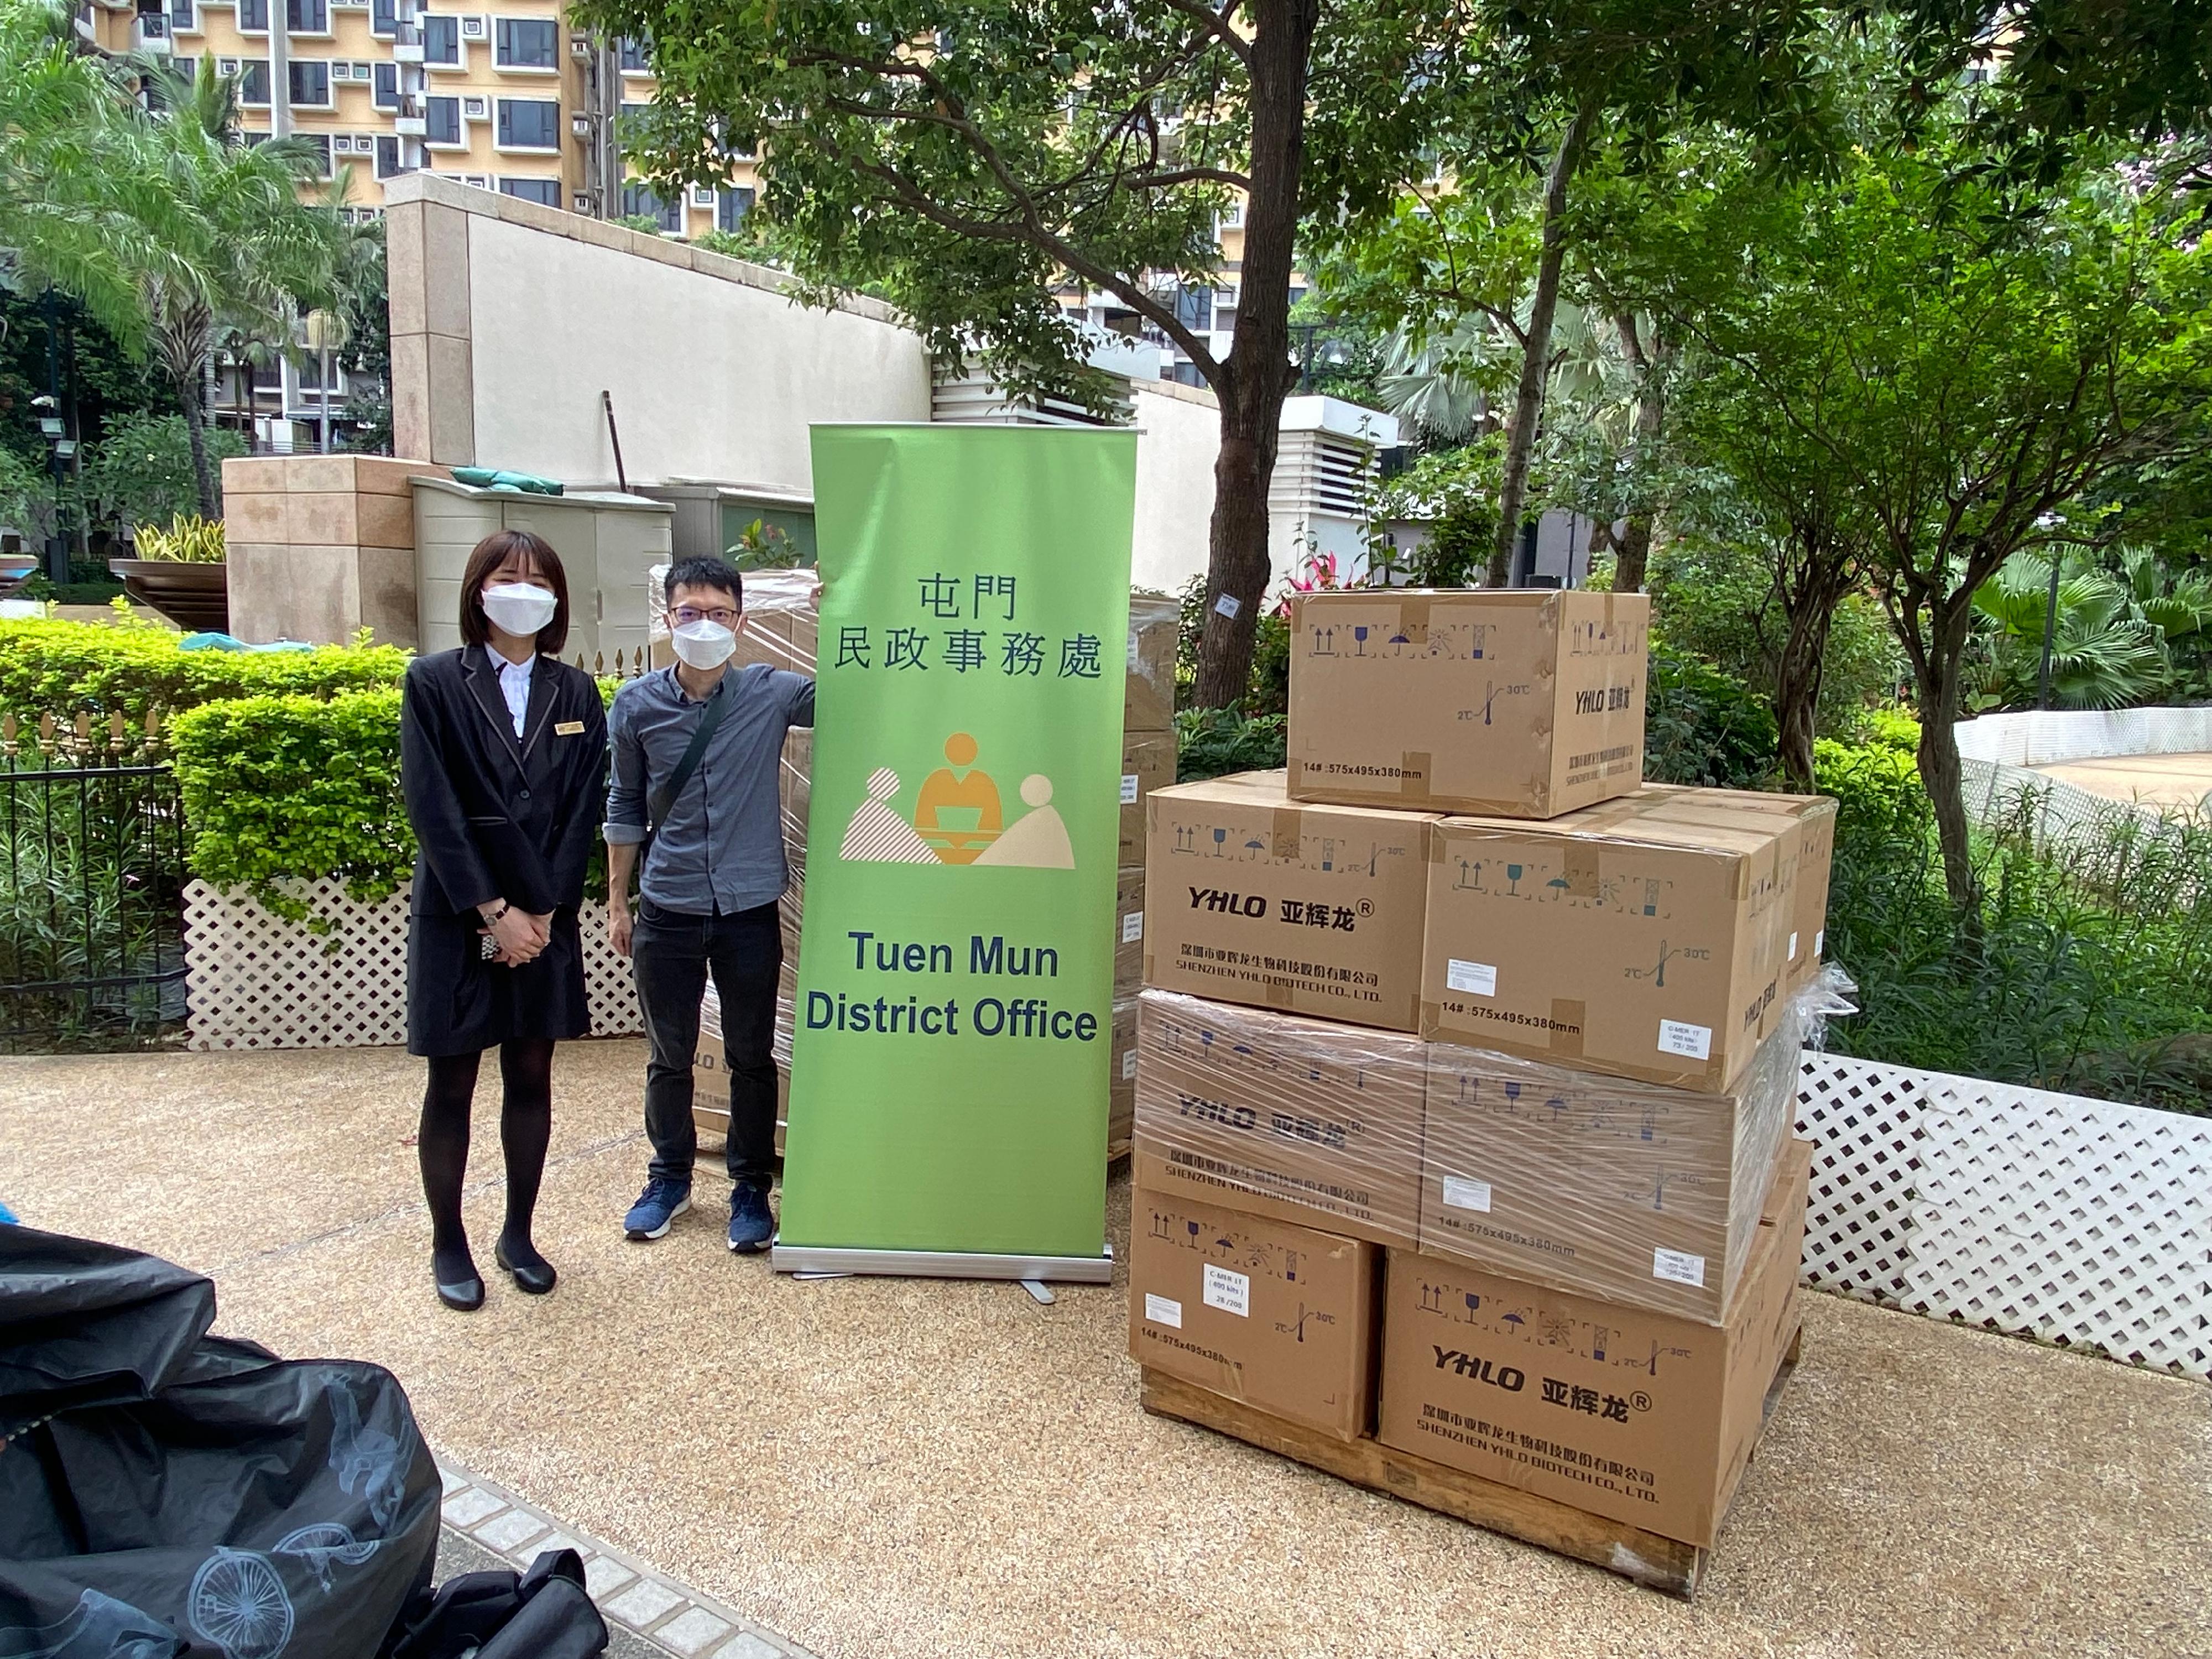 The Tuen Mun District Office today (June 2) distributed COVID-19 rapid test kits to households, cleansing workers and property management staff living and working in The Sherwood for voluntary testing through the property management company.